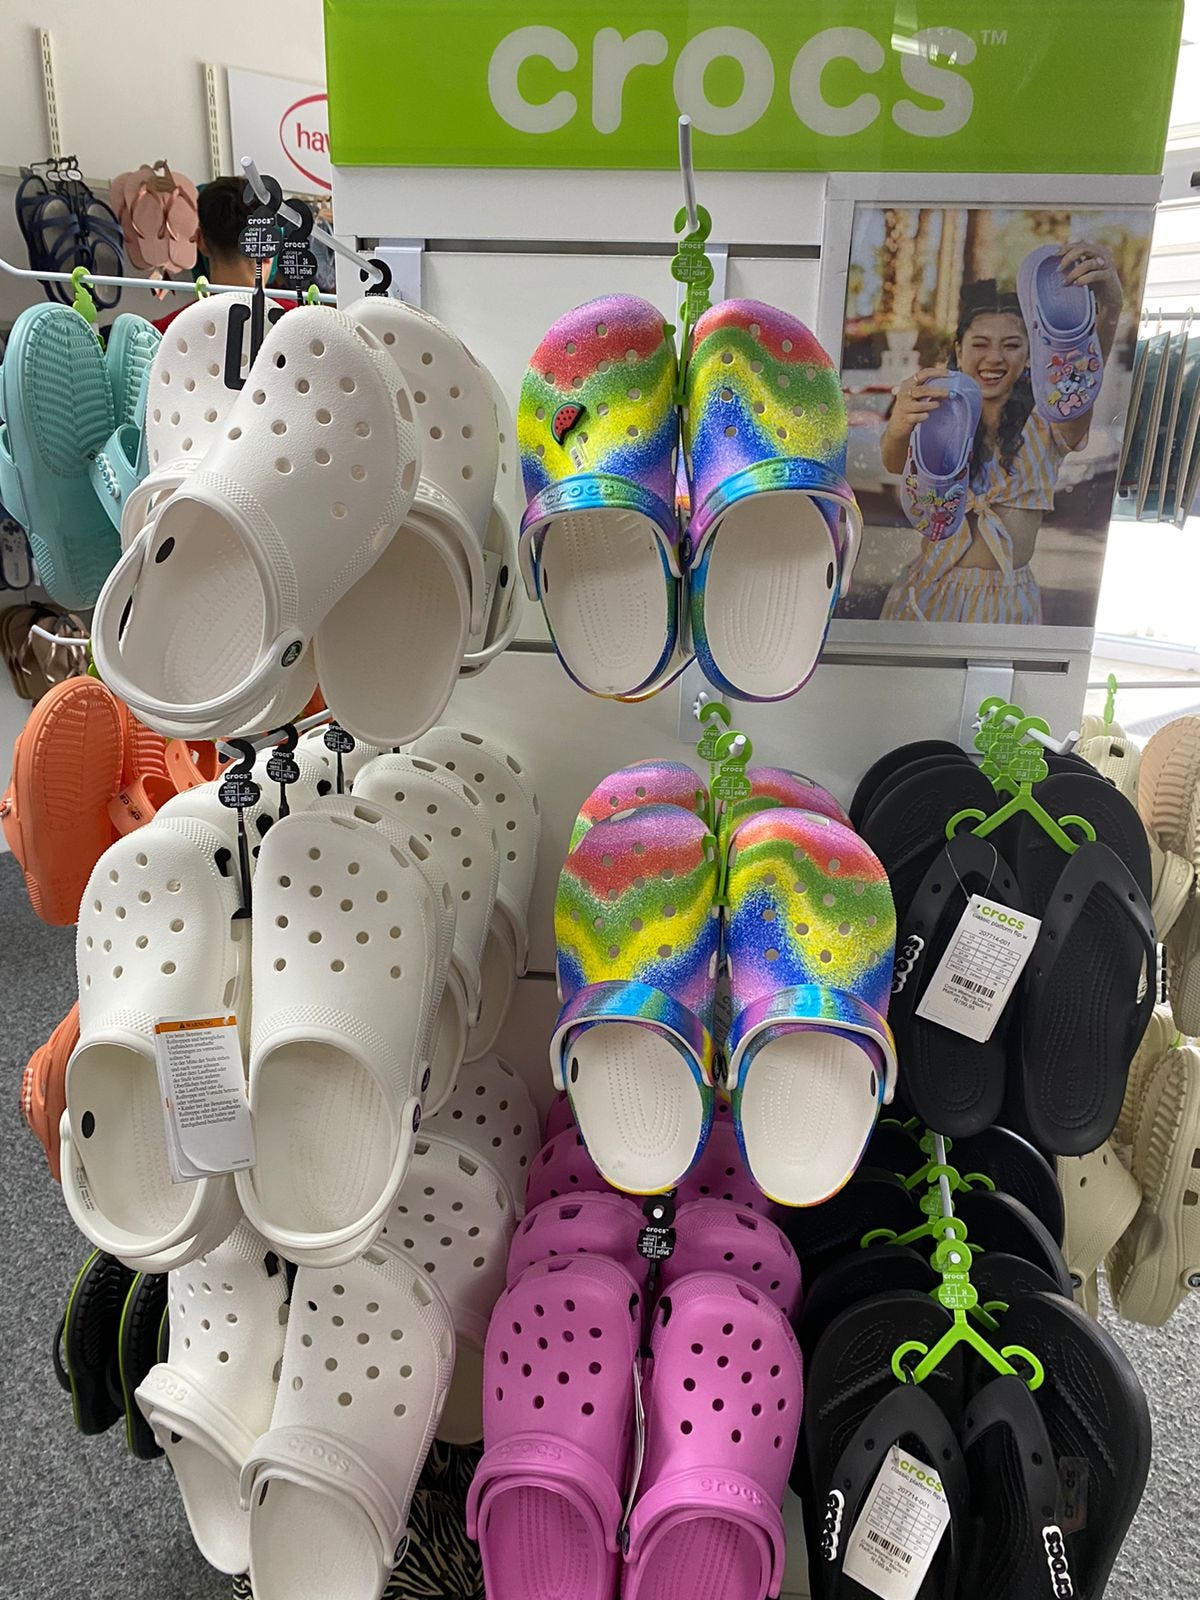 White Crocs are popular — how did that happen? | by Melina Lewis | Medium